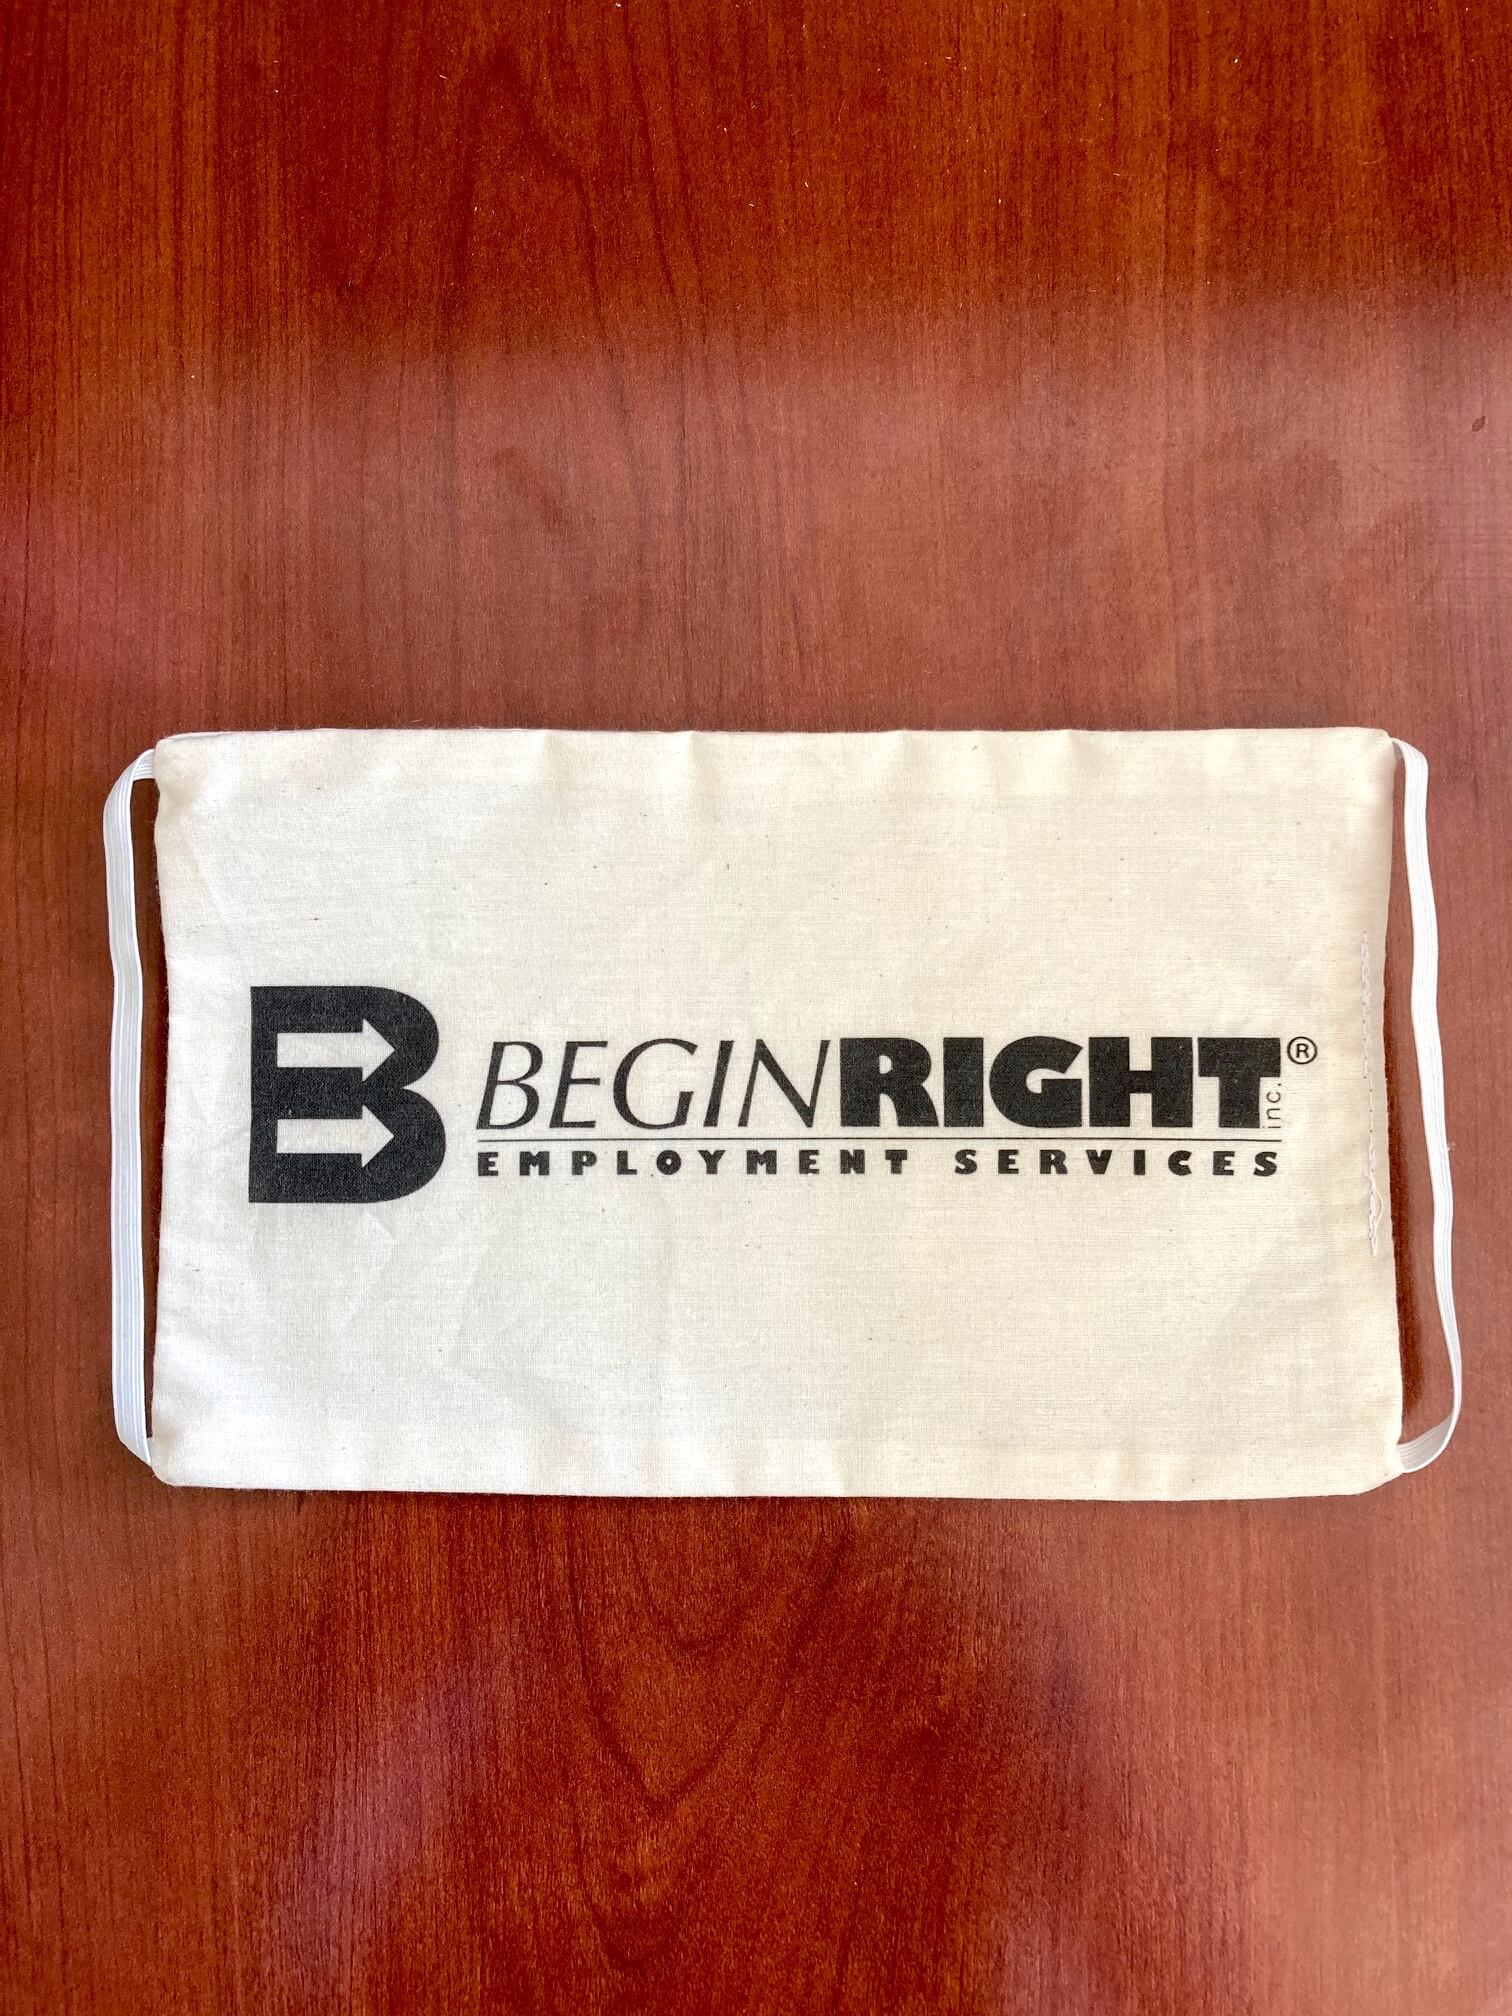 BeginRight Employment Services used its Roland DG BT-12 to print its logo on cloth masks like this one.